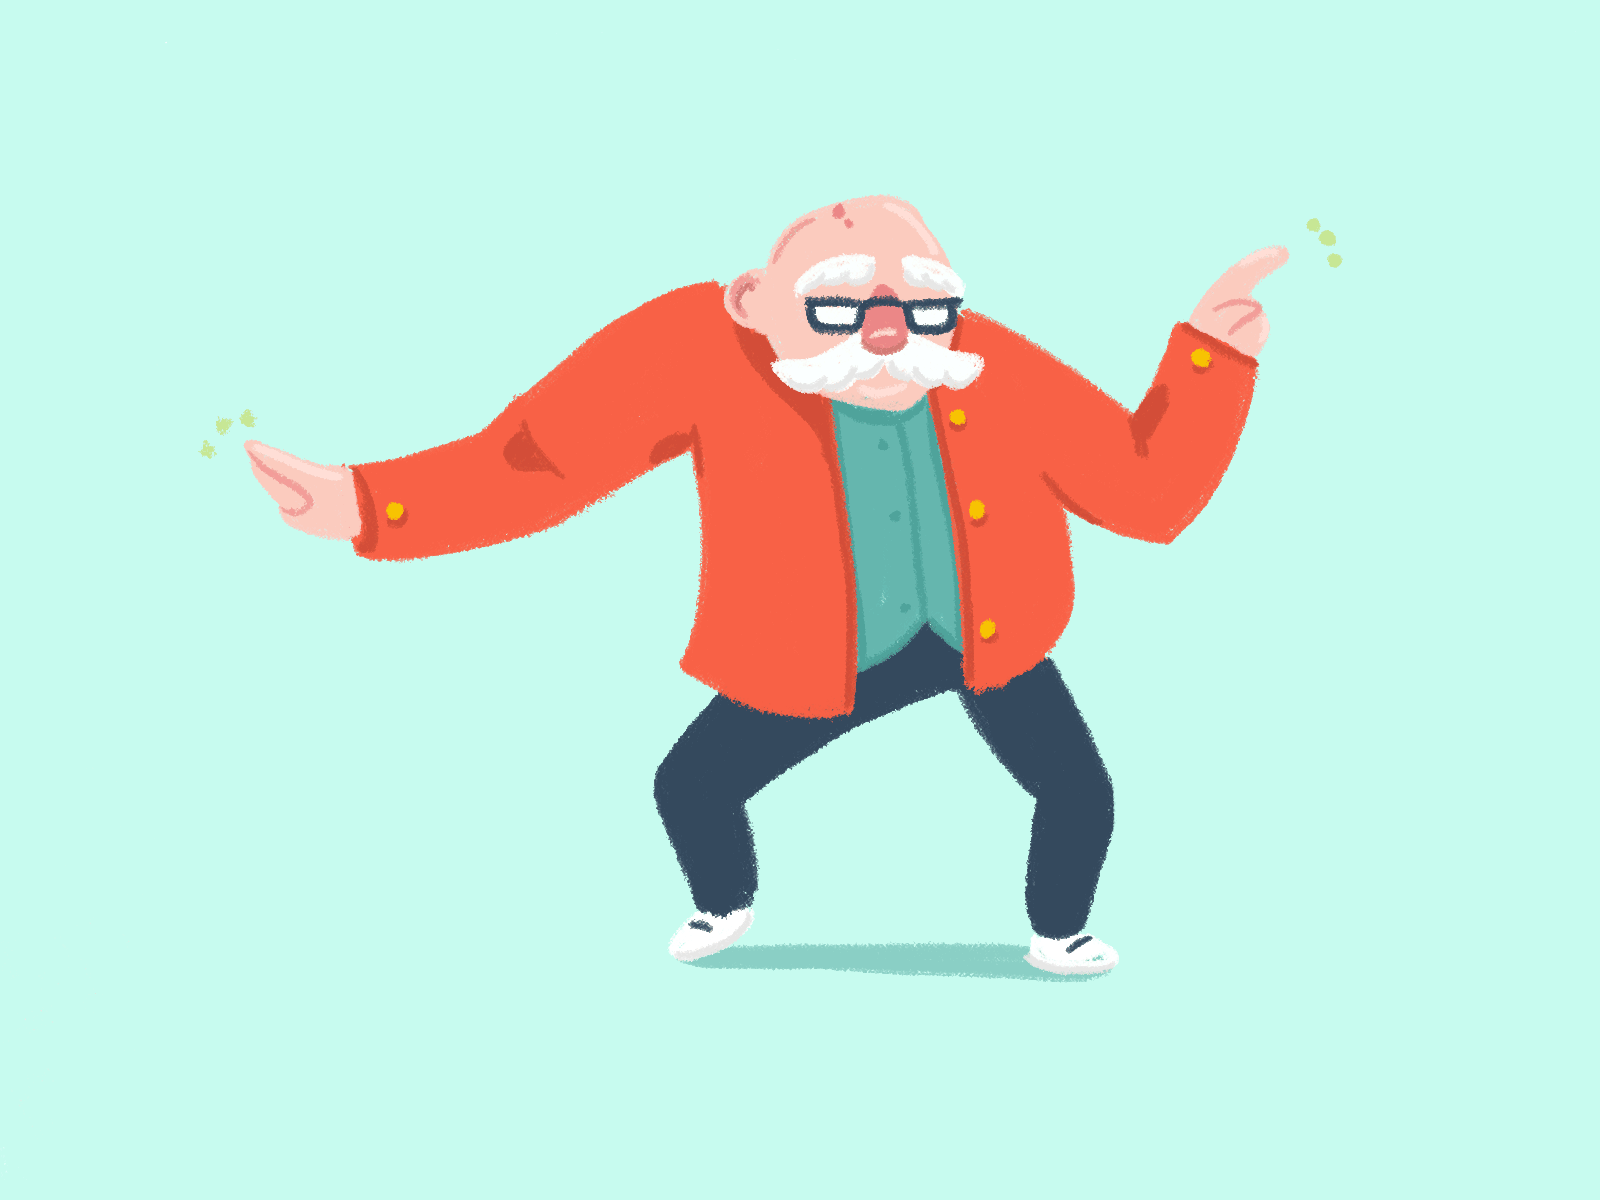 Dancing Man by Emily Gillis on Dribbble